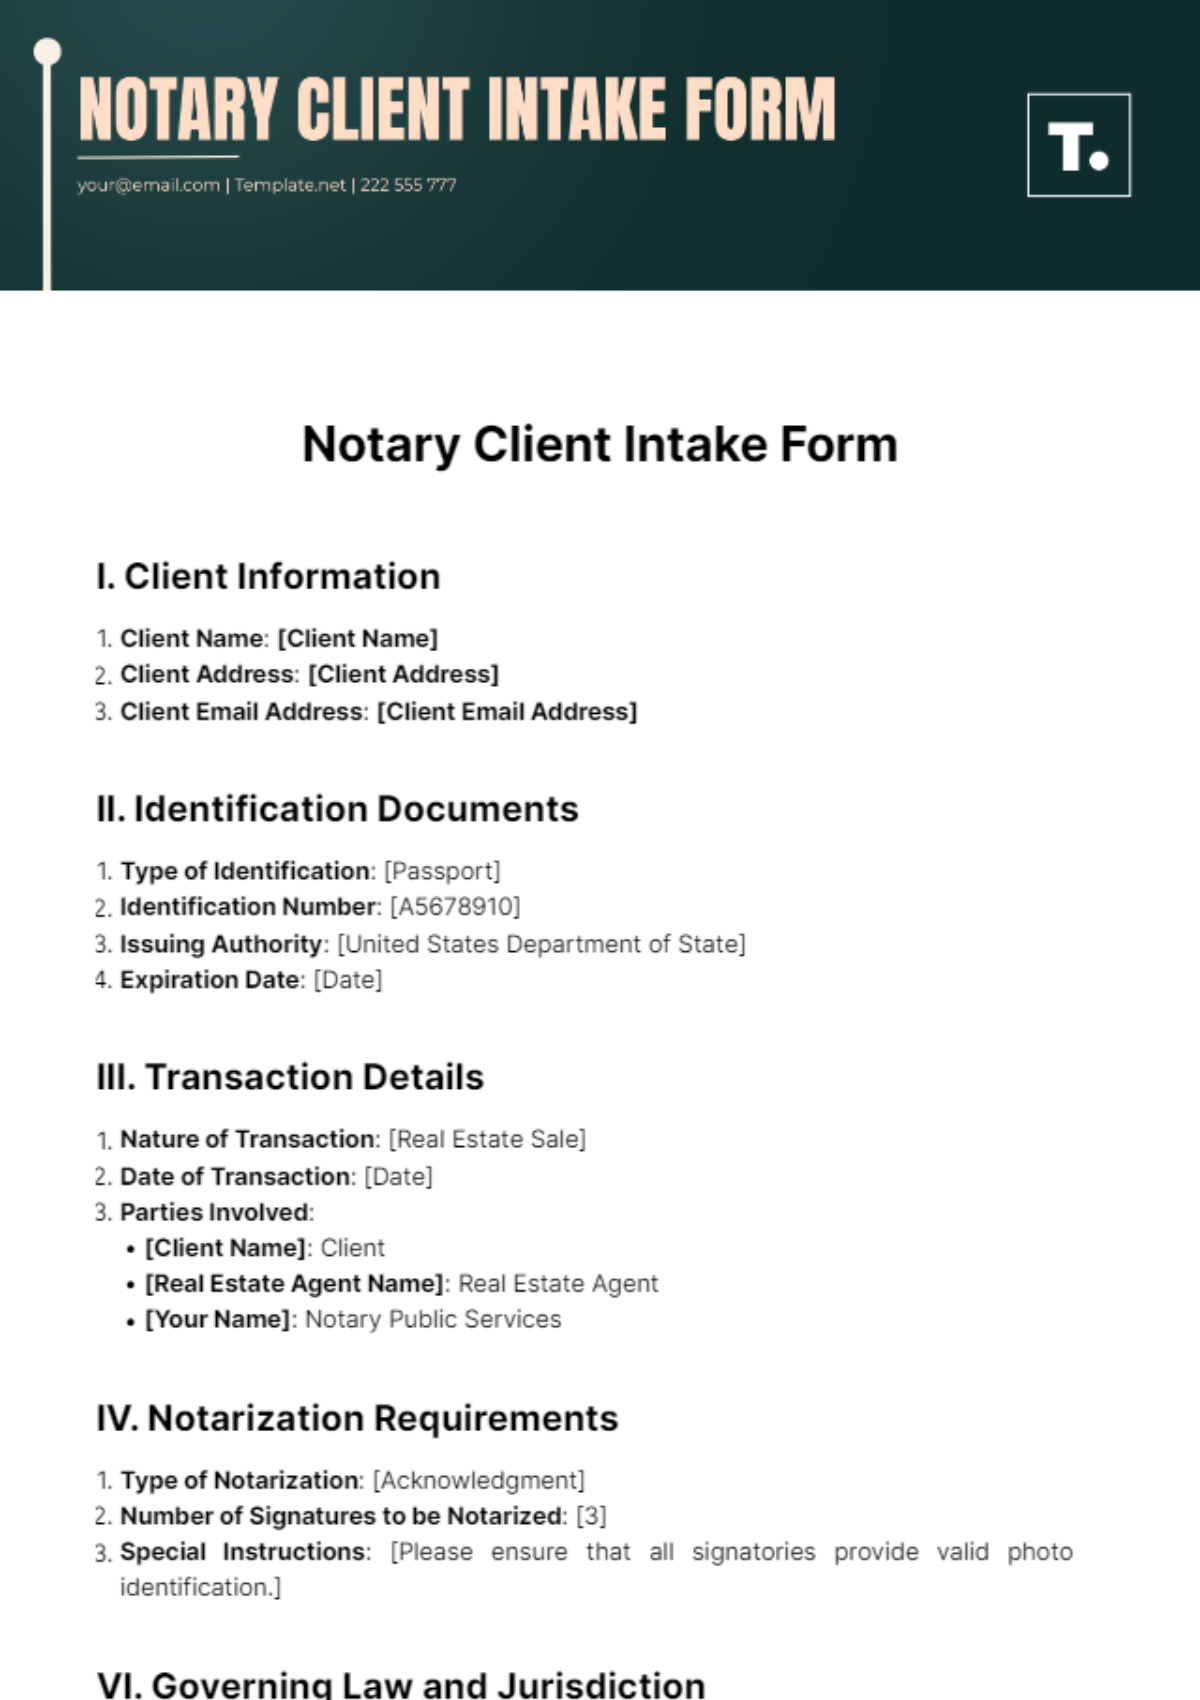 Free Notary Client Intake Form Template